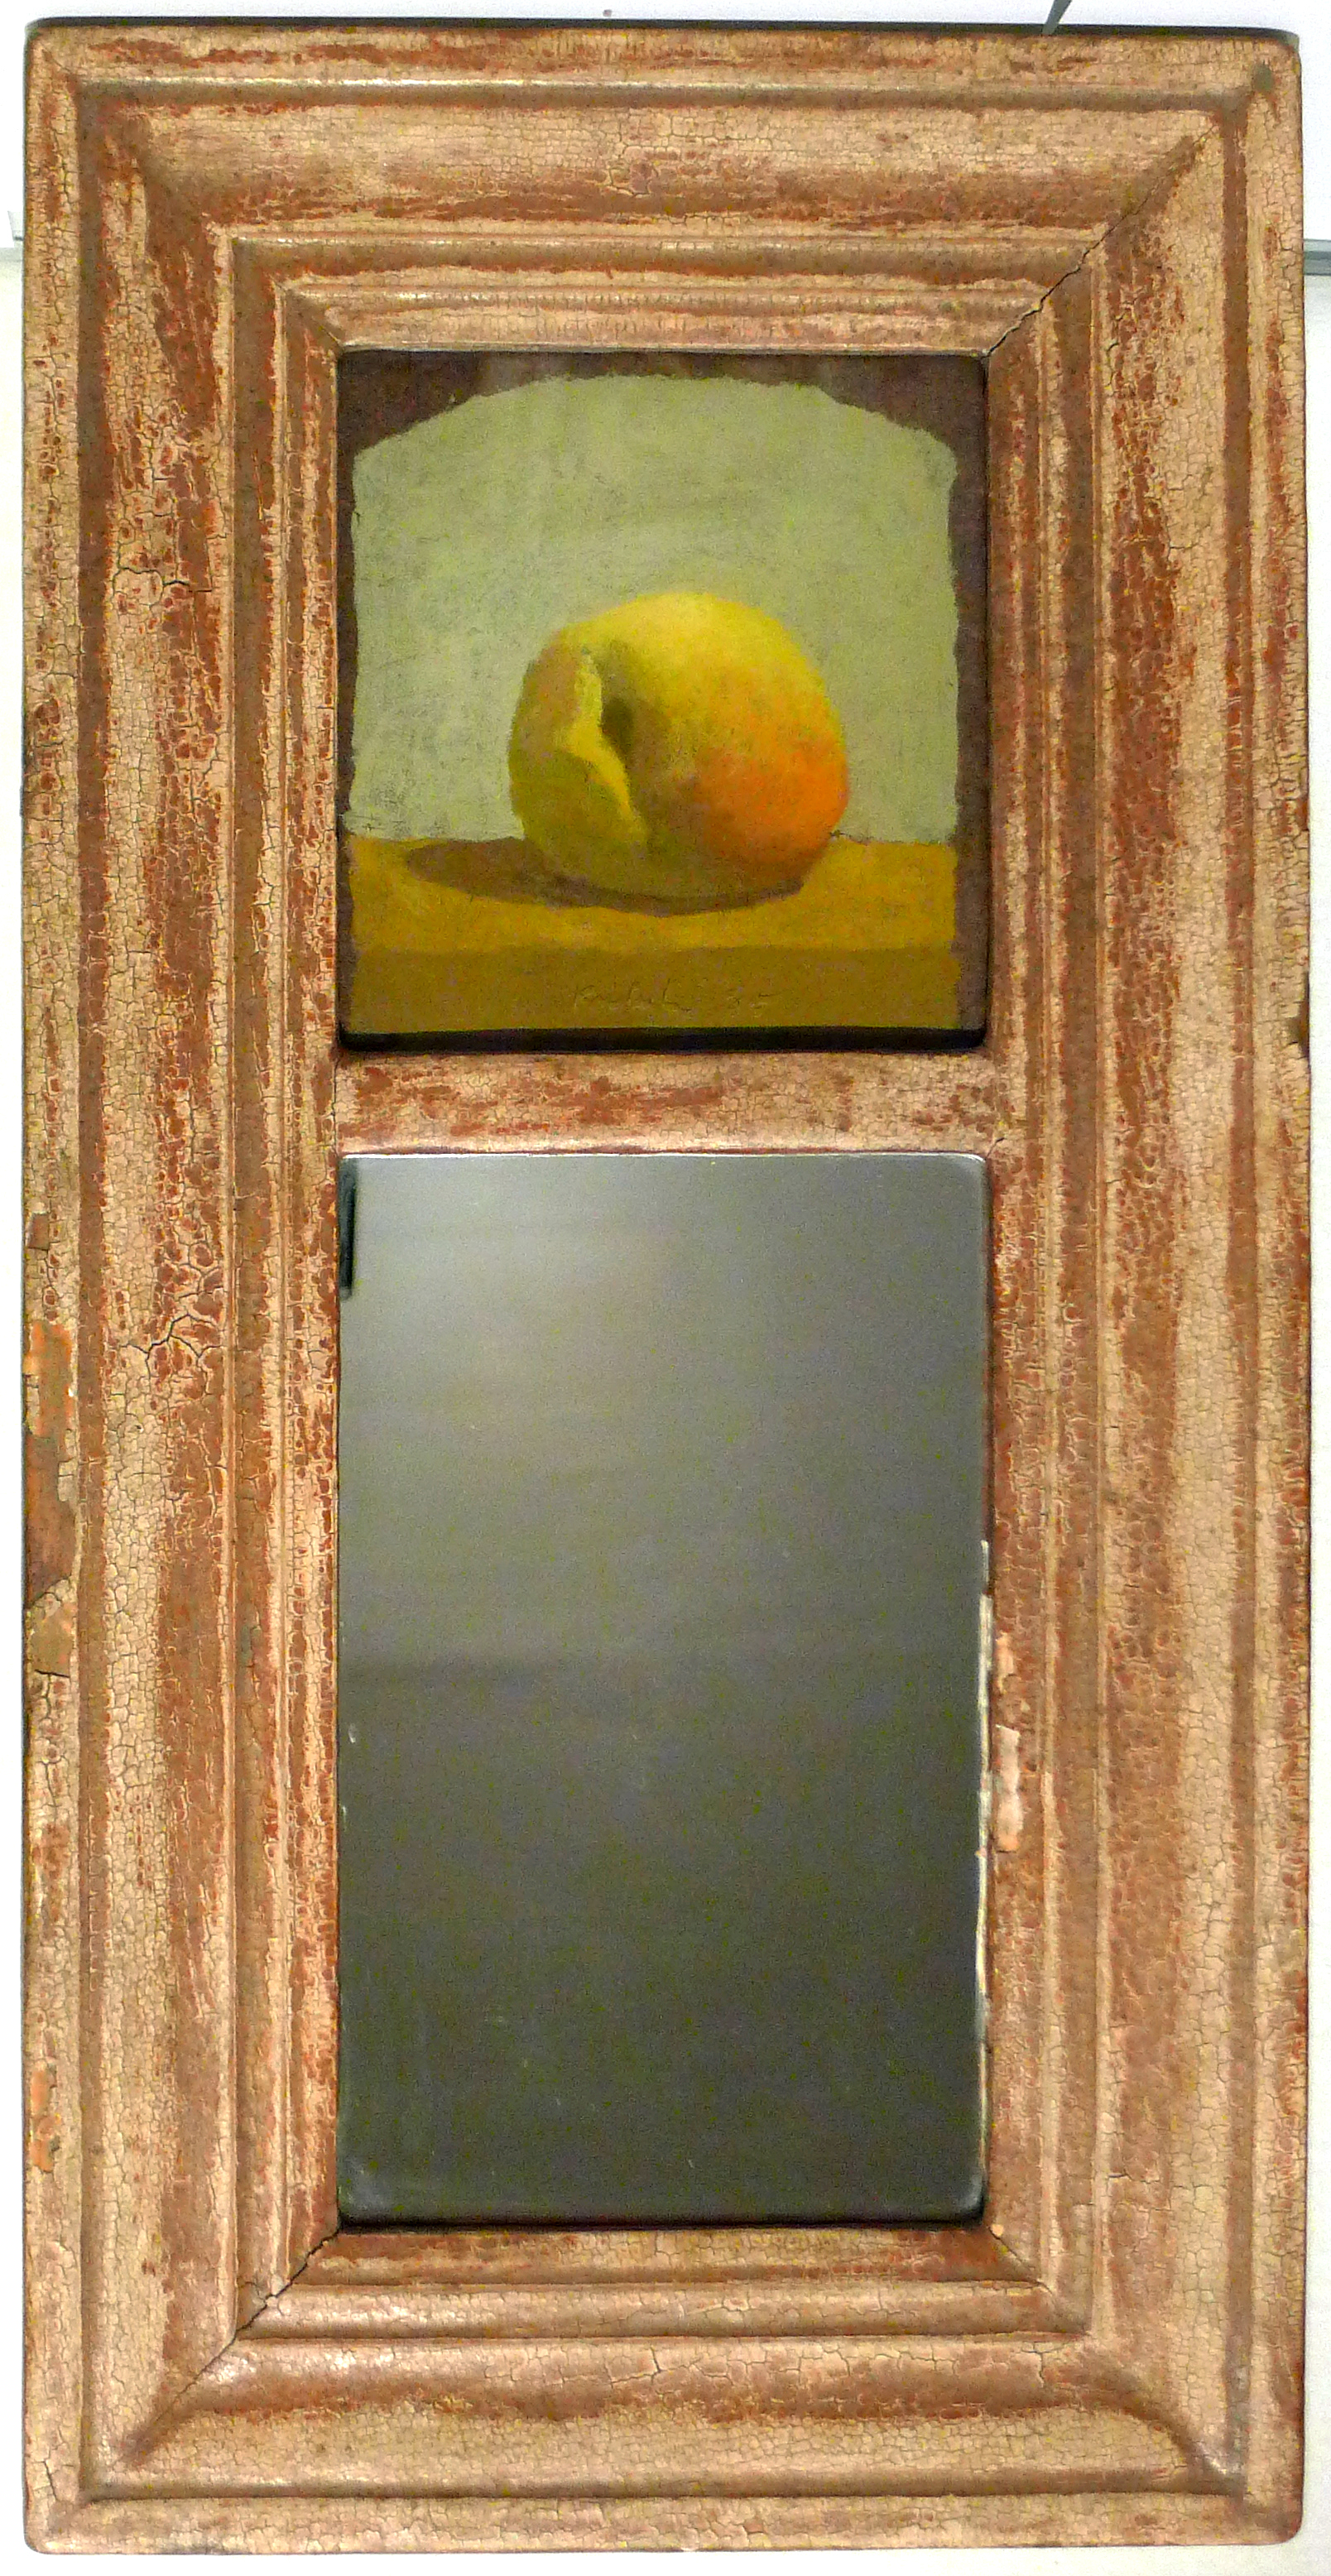 Yellow peach on brown table at top centerr in tall rectangular frame with mirror at lower centerr